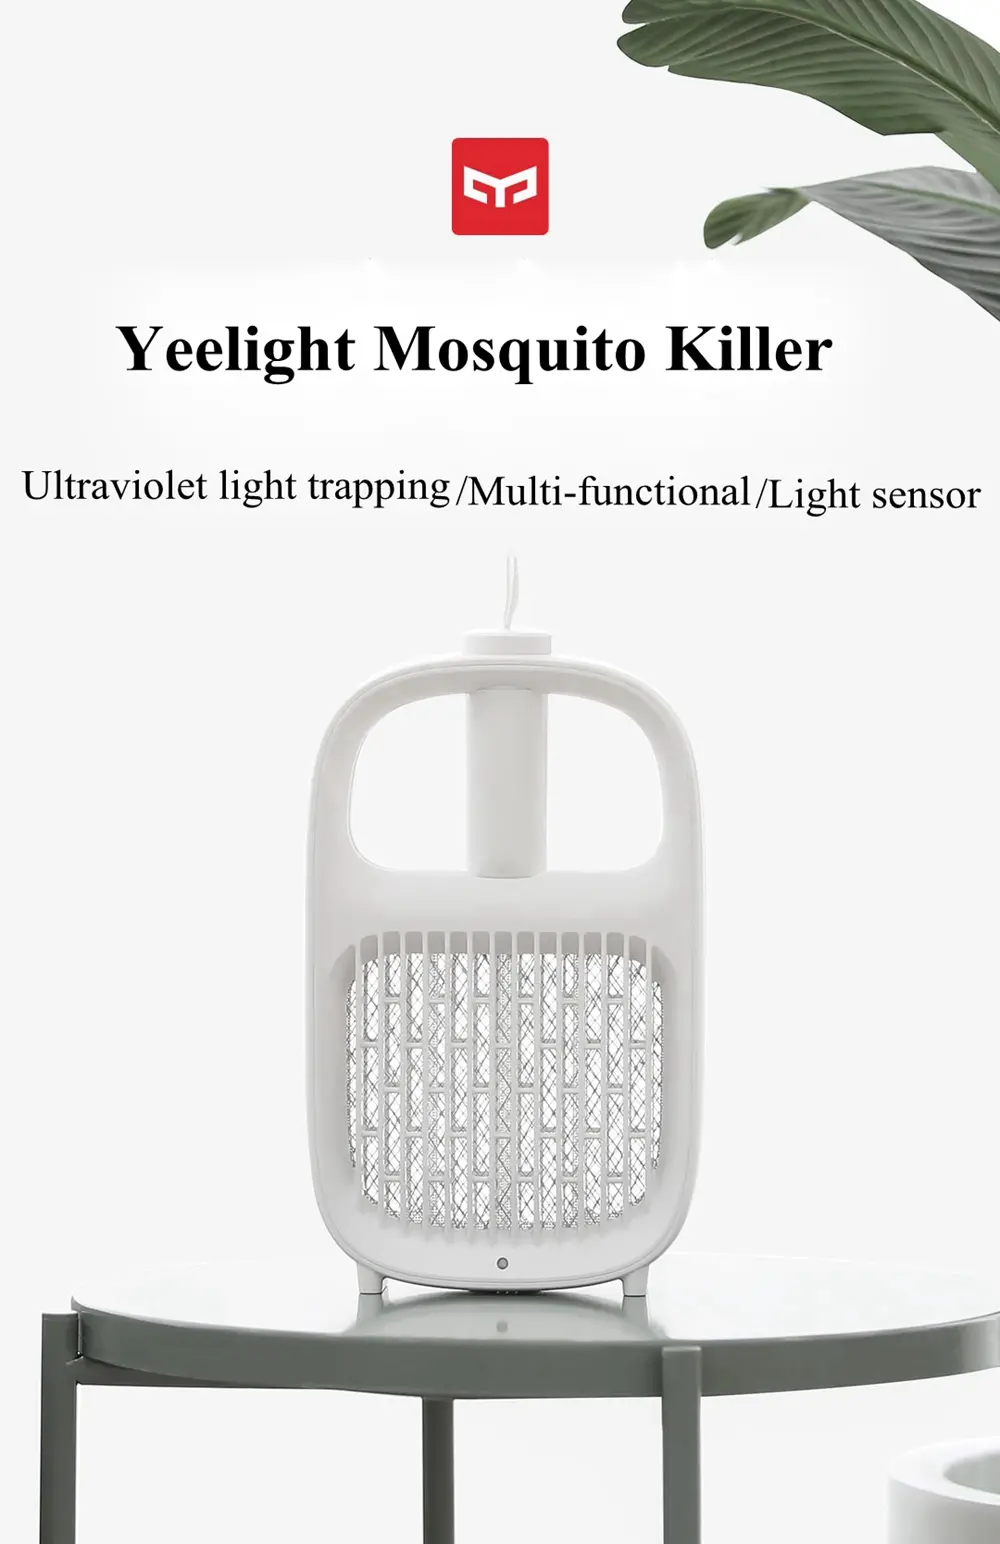 Fbbee5D3 5Cf8 404C 88E3 039F77316Fdb.jpg &Lt;H1&Gt;Yeelight Usb Rechargeable Mosquito Swatter Led Uv Mosquito Killer Lamp&Lt;/H1&Gt; &Lt;H2&Gt;&Lt;Strong&Gt;Main Feature:&Lt;/Strong&Gt;&Lt;/H2&Gt; &Lt;Ul&Gt; &Lt;Li&Gt;Electric Mosquito Swatter: Built-In Rechargeable 18650 Battery, Short Charging Time, Long Use Time&Lt;/Li&Gt; &Lt;Li&Gt;360-400Nm Uv Trap Lamp: Comes With A Light-Controlled Sensor,  Easy To Kill Mosquitoes In Dark Environments&Lt;/Li&Gt; &Lt;Li&Gt;Safe To Use: Physical Mosquito Killing, No Chemicals, No Radiation, And Entirely Non-Toxic. Health And Environmental Protection&Lt;/Li&Gt; &Lt;Li&Gt;Portable To Carry: This Mosquito Zapper Comes In A Practical Design, With The Small Dimensions Allowing You To Carry It Anywhere You Need It!&Lt;/Li&Gt; &Lt;/Ul&Gt; Yeelight Usb Rechargeable Mosquito Yeelight Usb Rechargeable Mosquito Swatter Led Uv Mosquito Killer Lamp